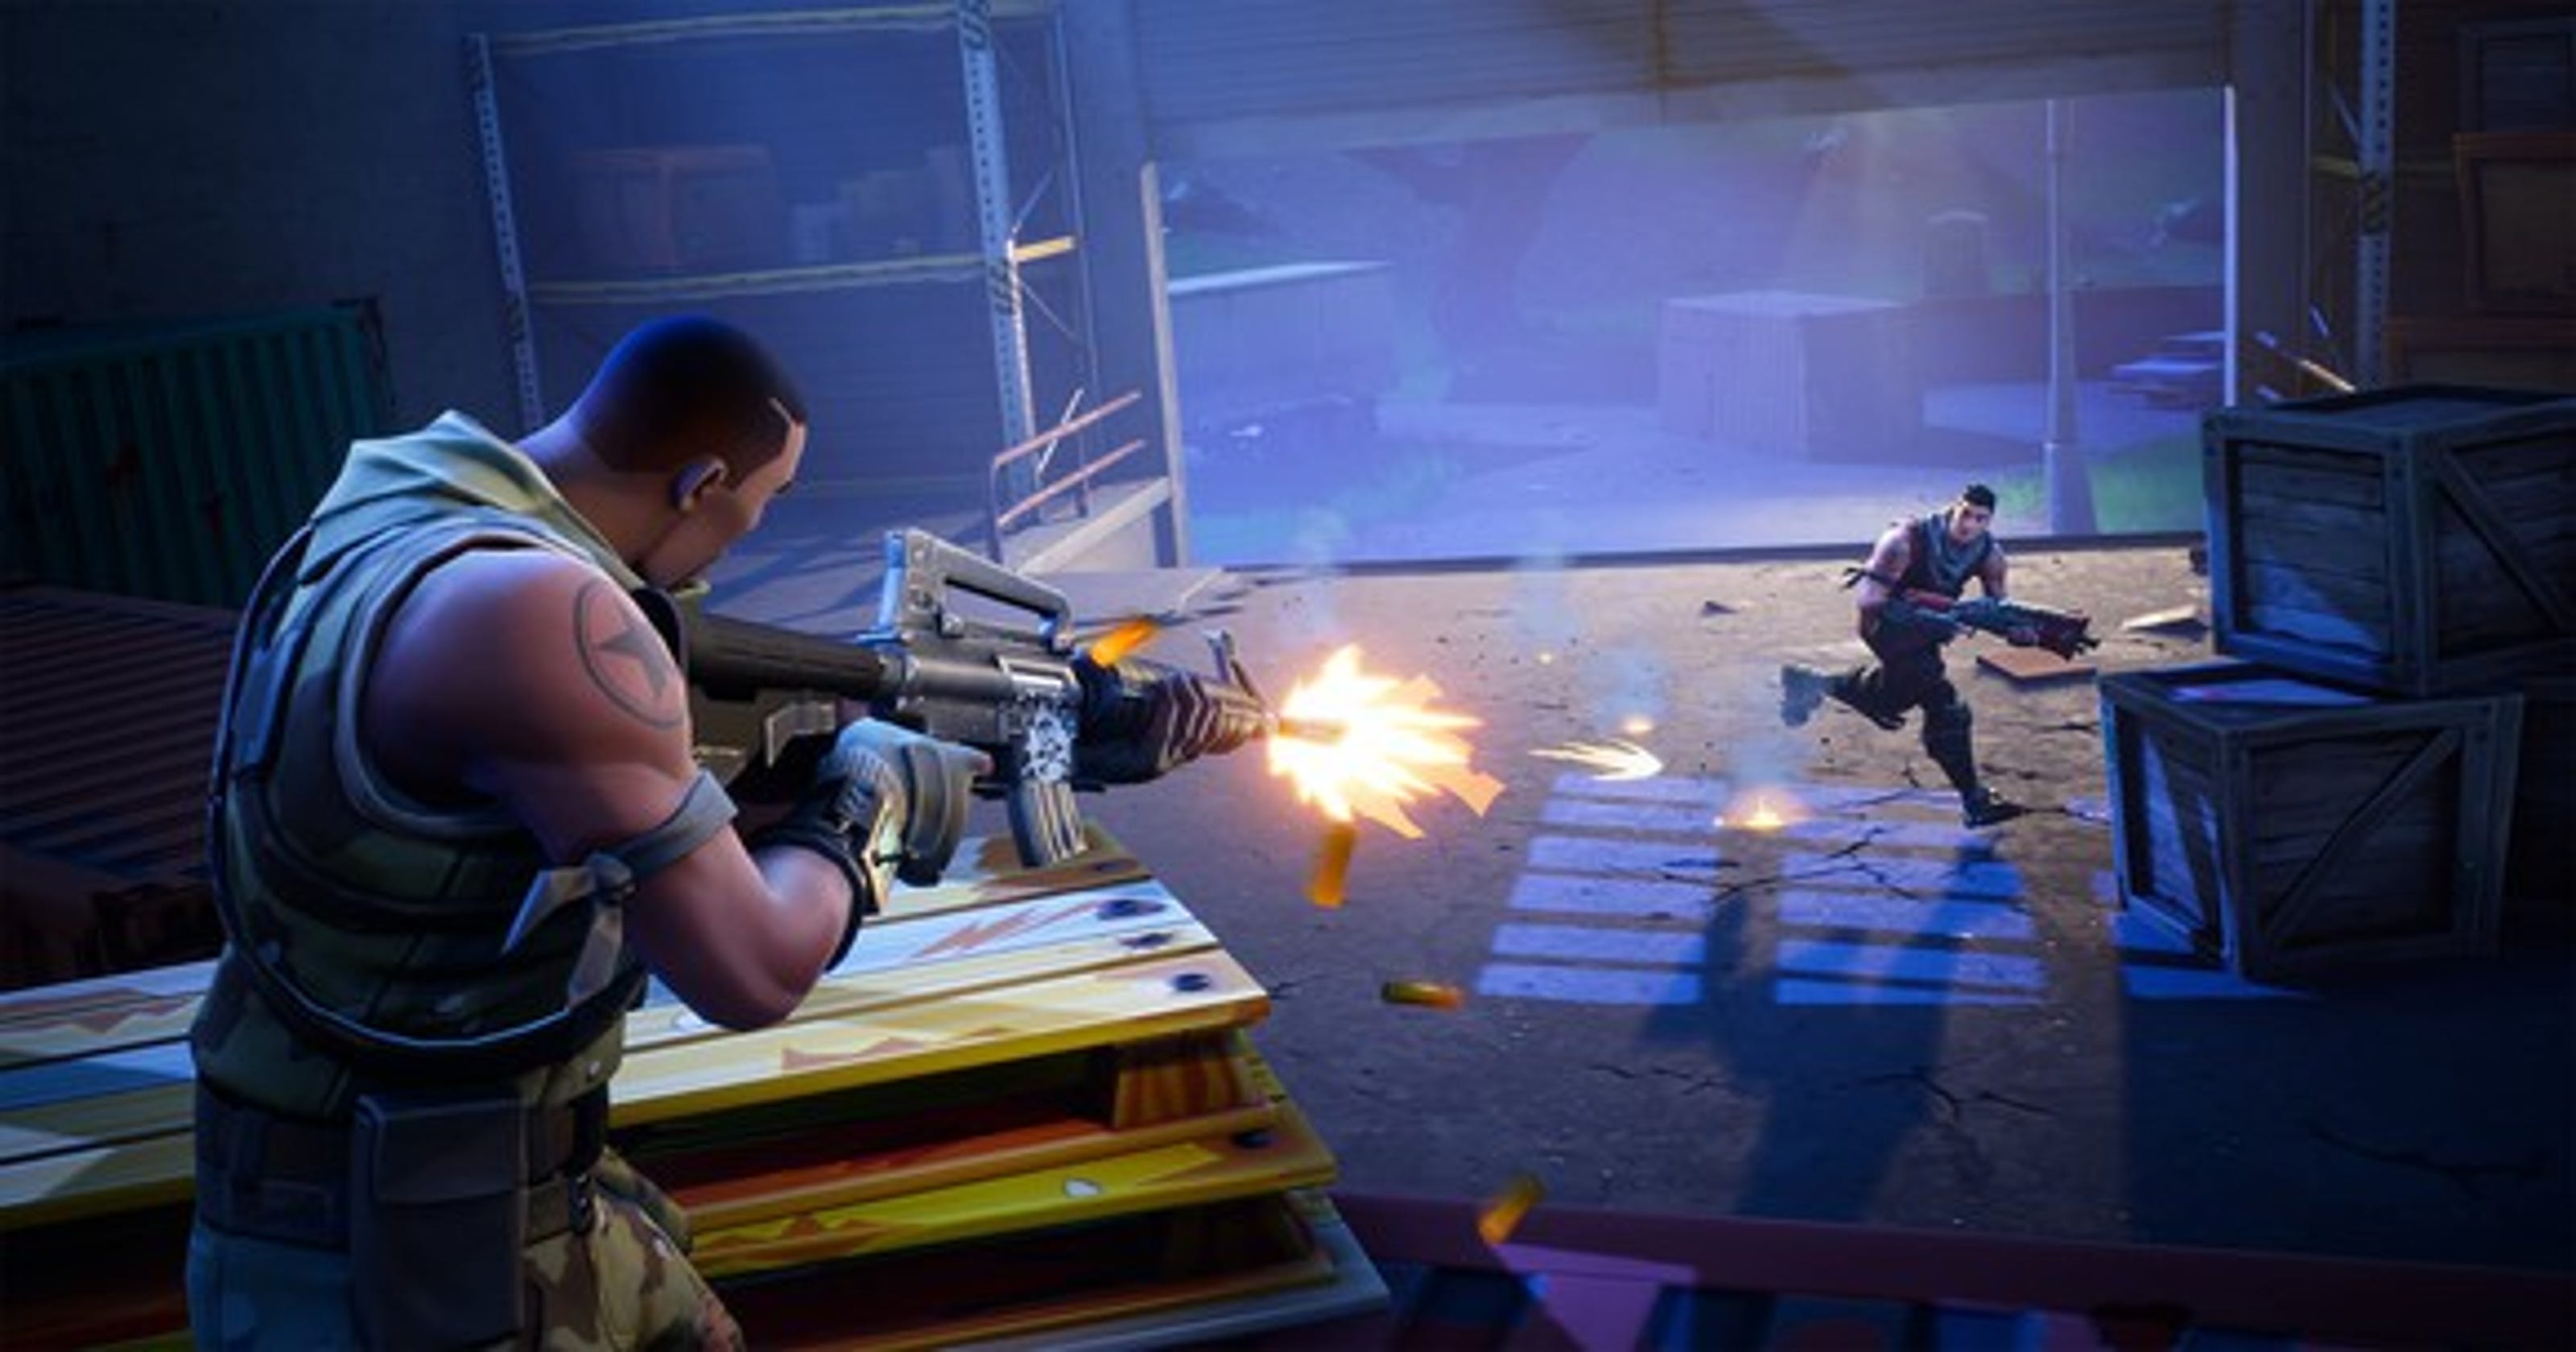 new york man 45 charged with threatening 11 year old over game of fortnite - fortnite charges